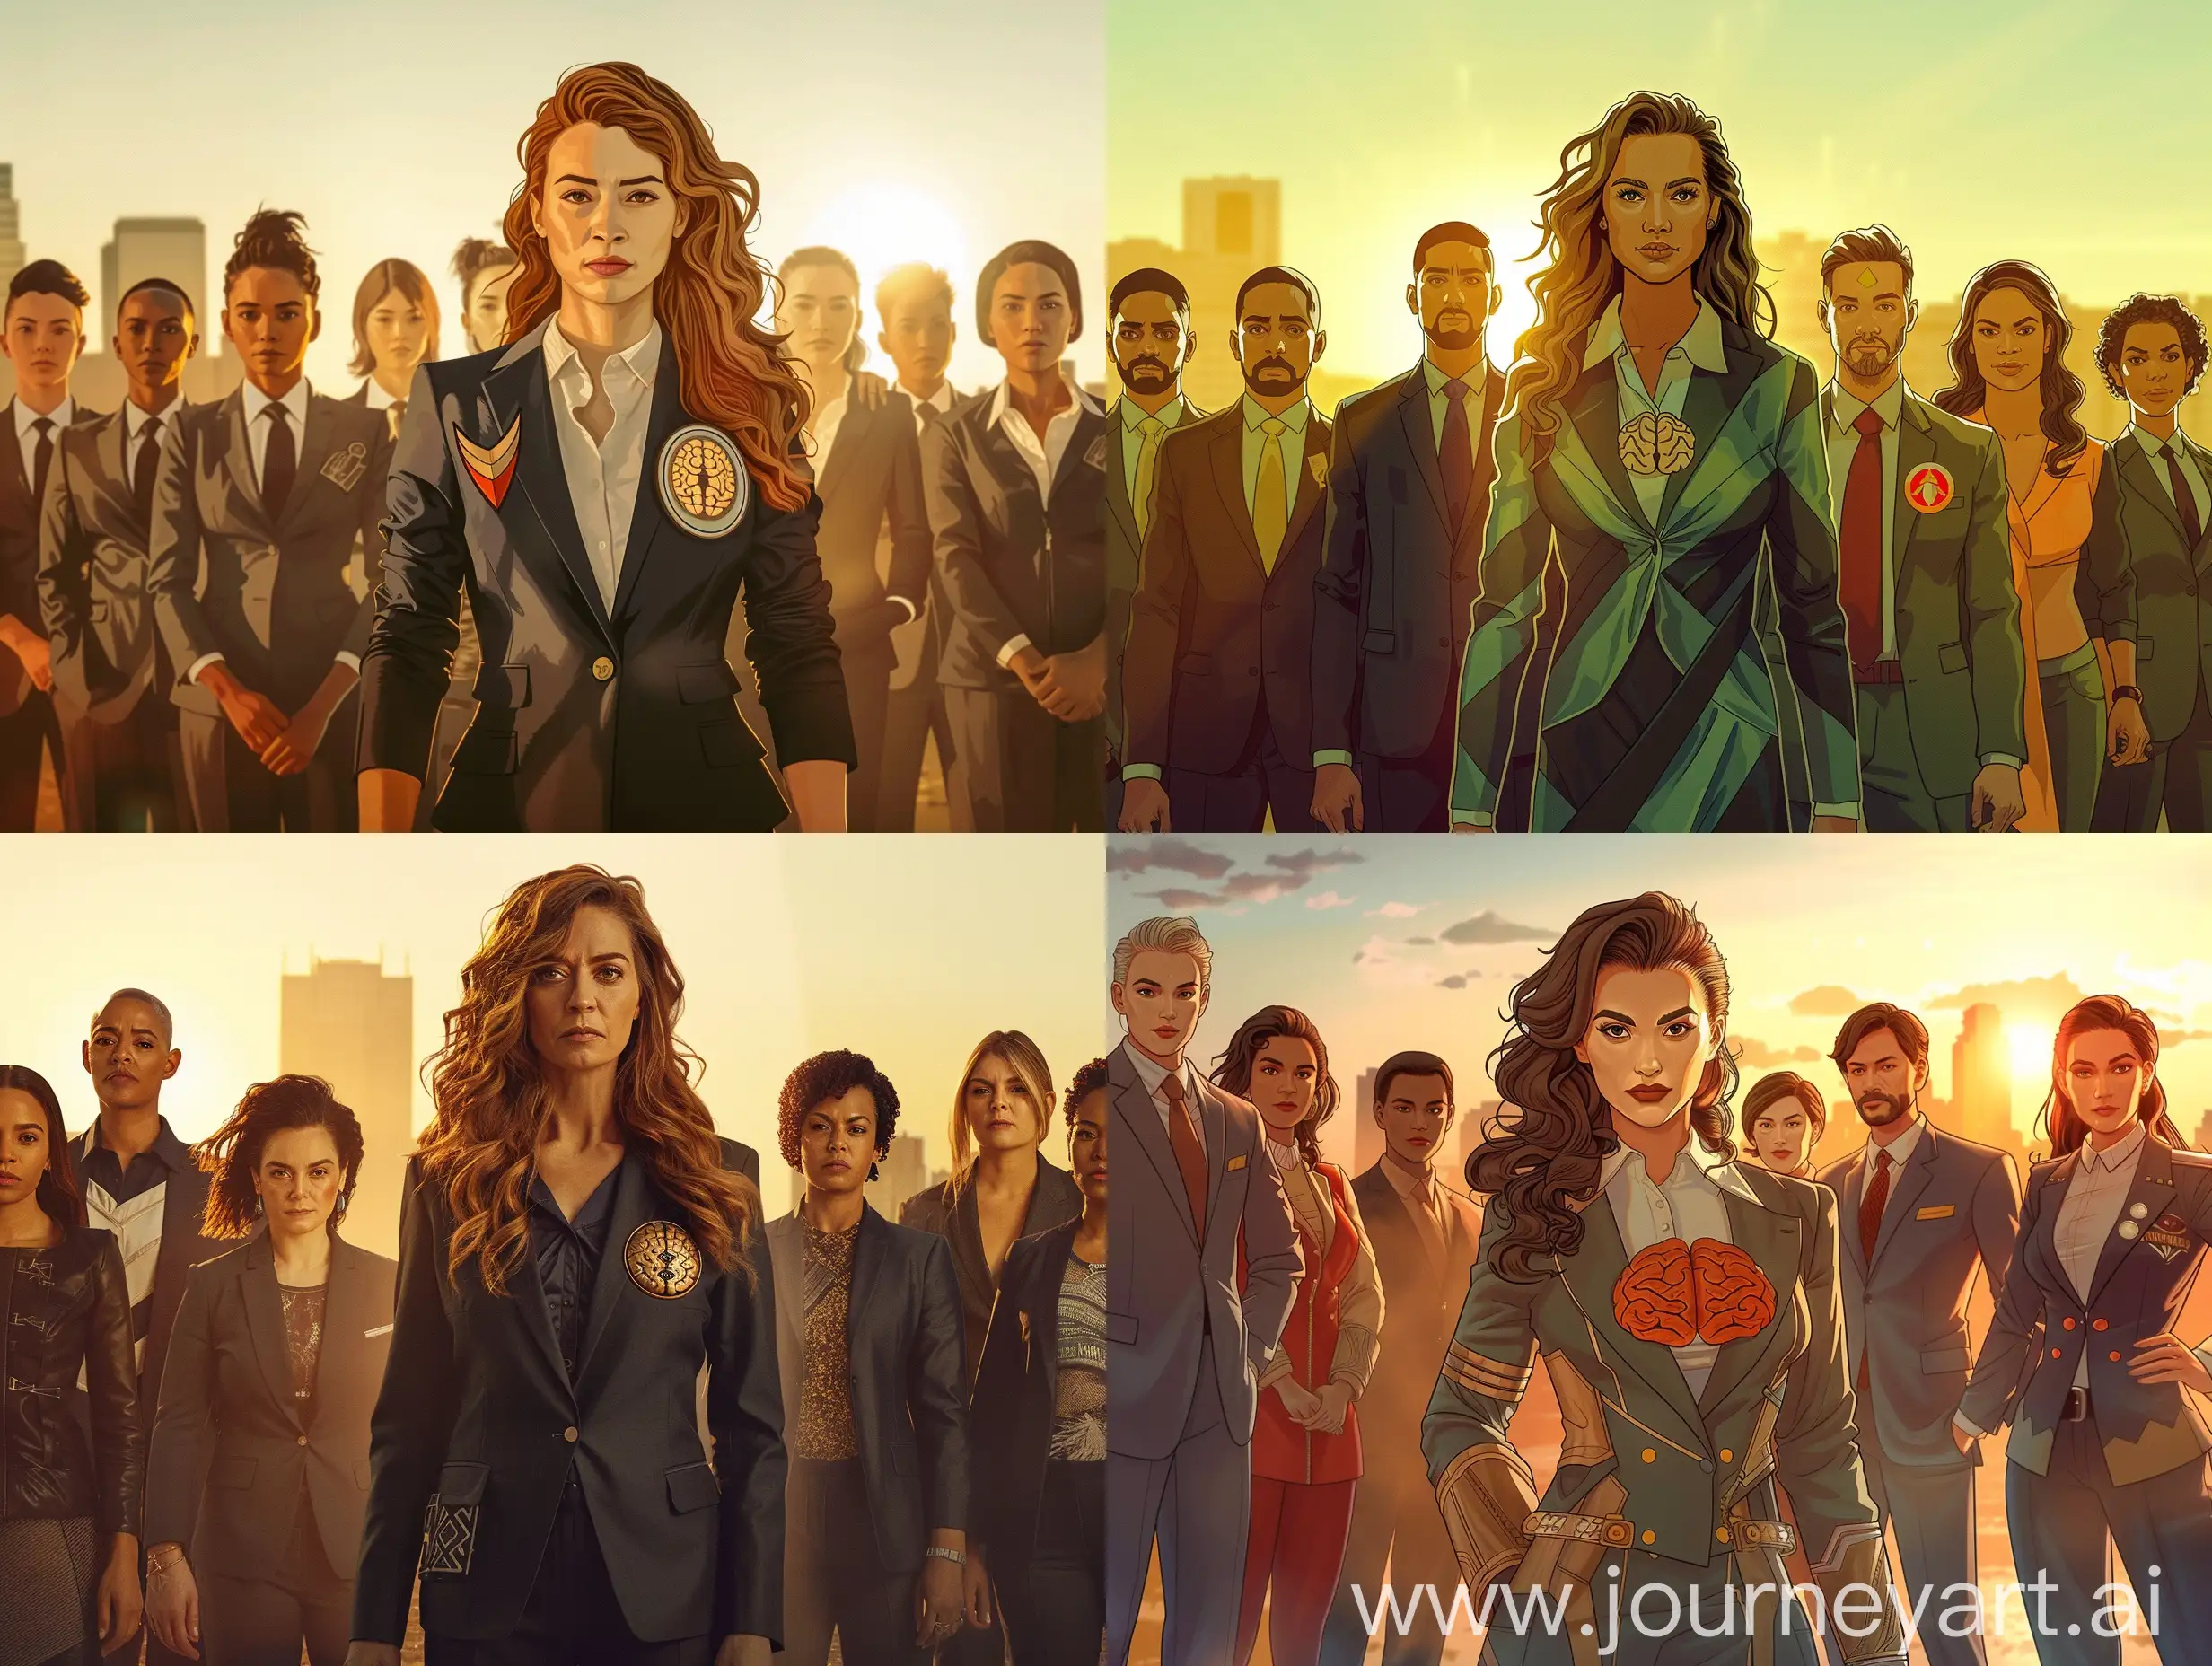 Subject: The focal point of the image is Clara, a woman leader 50 years old, wavy hair parted on the right, standing as a symbol of strength and leadership. Her presence serves as the central theme, capturing attention and conveying a sense of empowerment. The diverse other 9 women and 4 men form a united front around her, emphasizing the theme of inclusivity and cooperation in the face of challenges.
Background/Setting: The scene unfolds against a backdrop of a city skyline in the distance light in the buildings and a beautiful clear sky with sunset shades.
Items/Costume: Clara is wearing a warrior or superhero type of clothes with a brain symbol and a heart symbol on her chest. The others are wearing business suits with some warrior elements and accessories that allude to the four elements – wood, fire, earth and steel.  
Appearance: Clara exudes confidence yet empathy and determination, her facial expressions and posture conveying a sense of purpose and leadership. The other women and men showcase a range of appearances, emphasizing the multicultural aspect of the gathering.